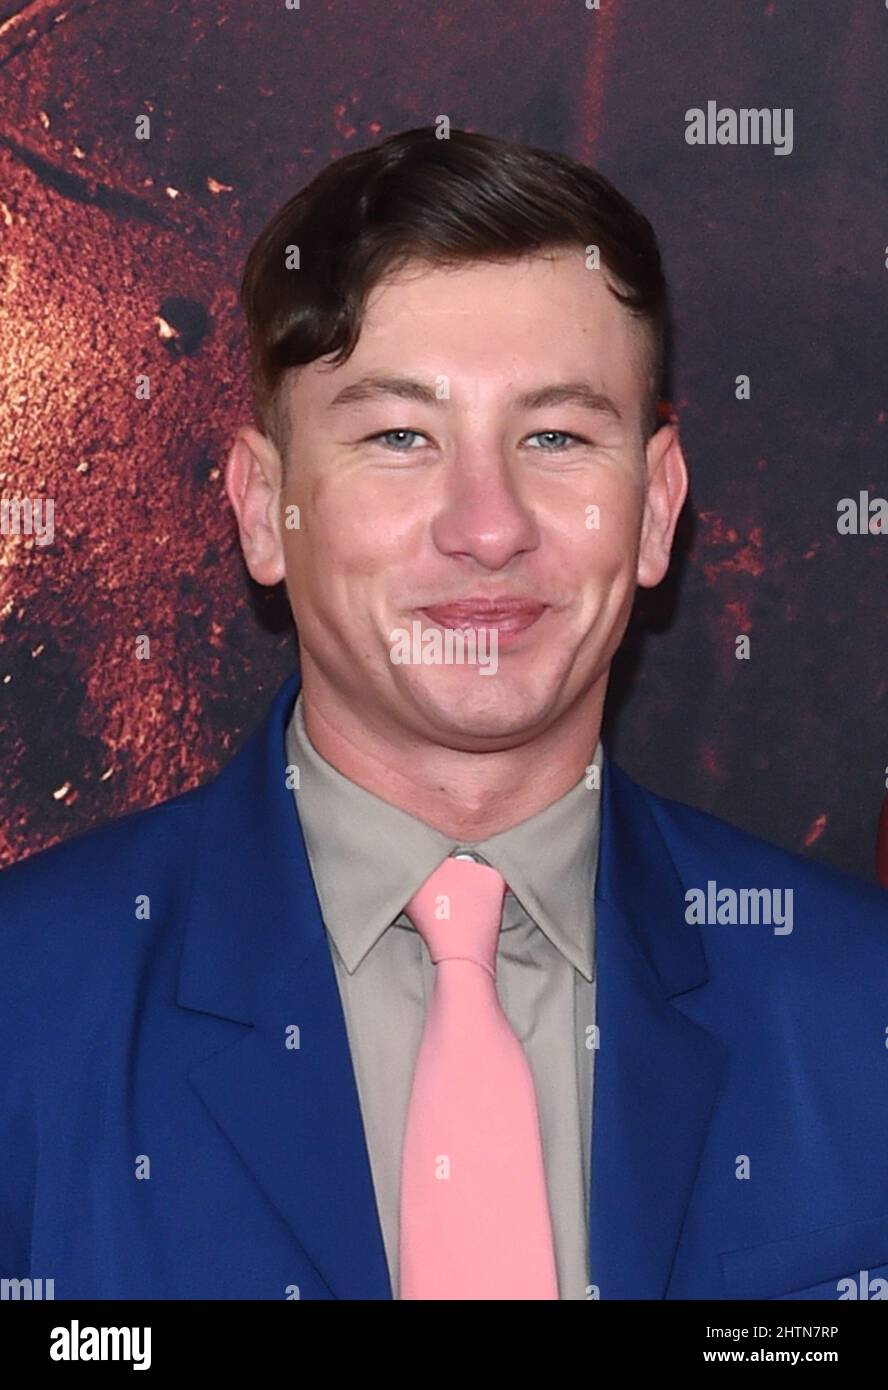 New York, NY, USA. 01st Mar, 2022. Barry Keoghan at The Batman World Premiere on March 01, 2022 in New York City. Credit: John Palmer/Media Punch/Alamy Live News Stock Photo